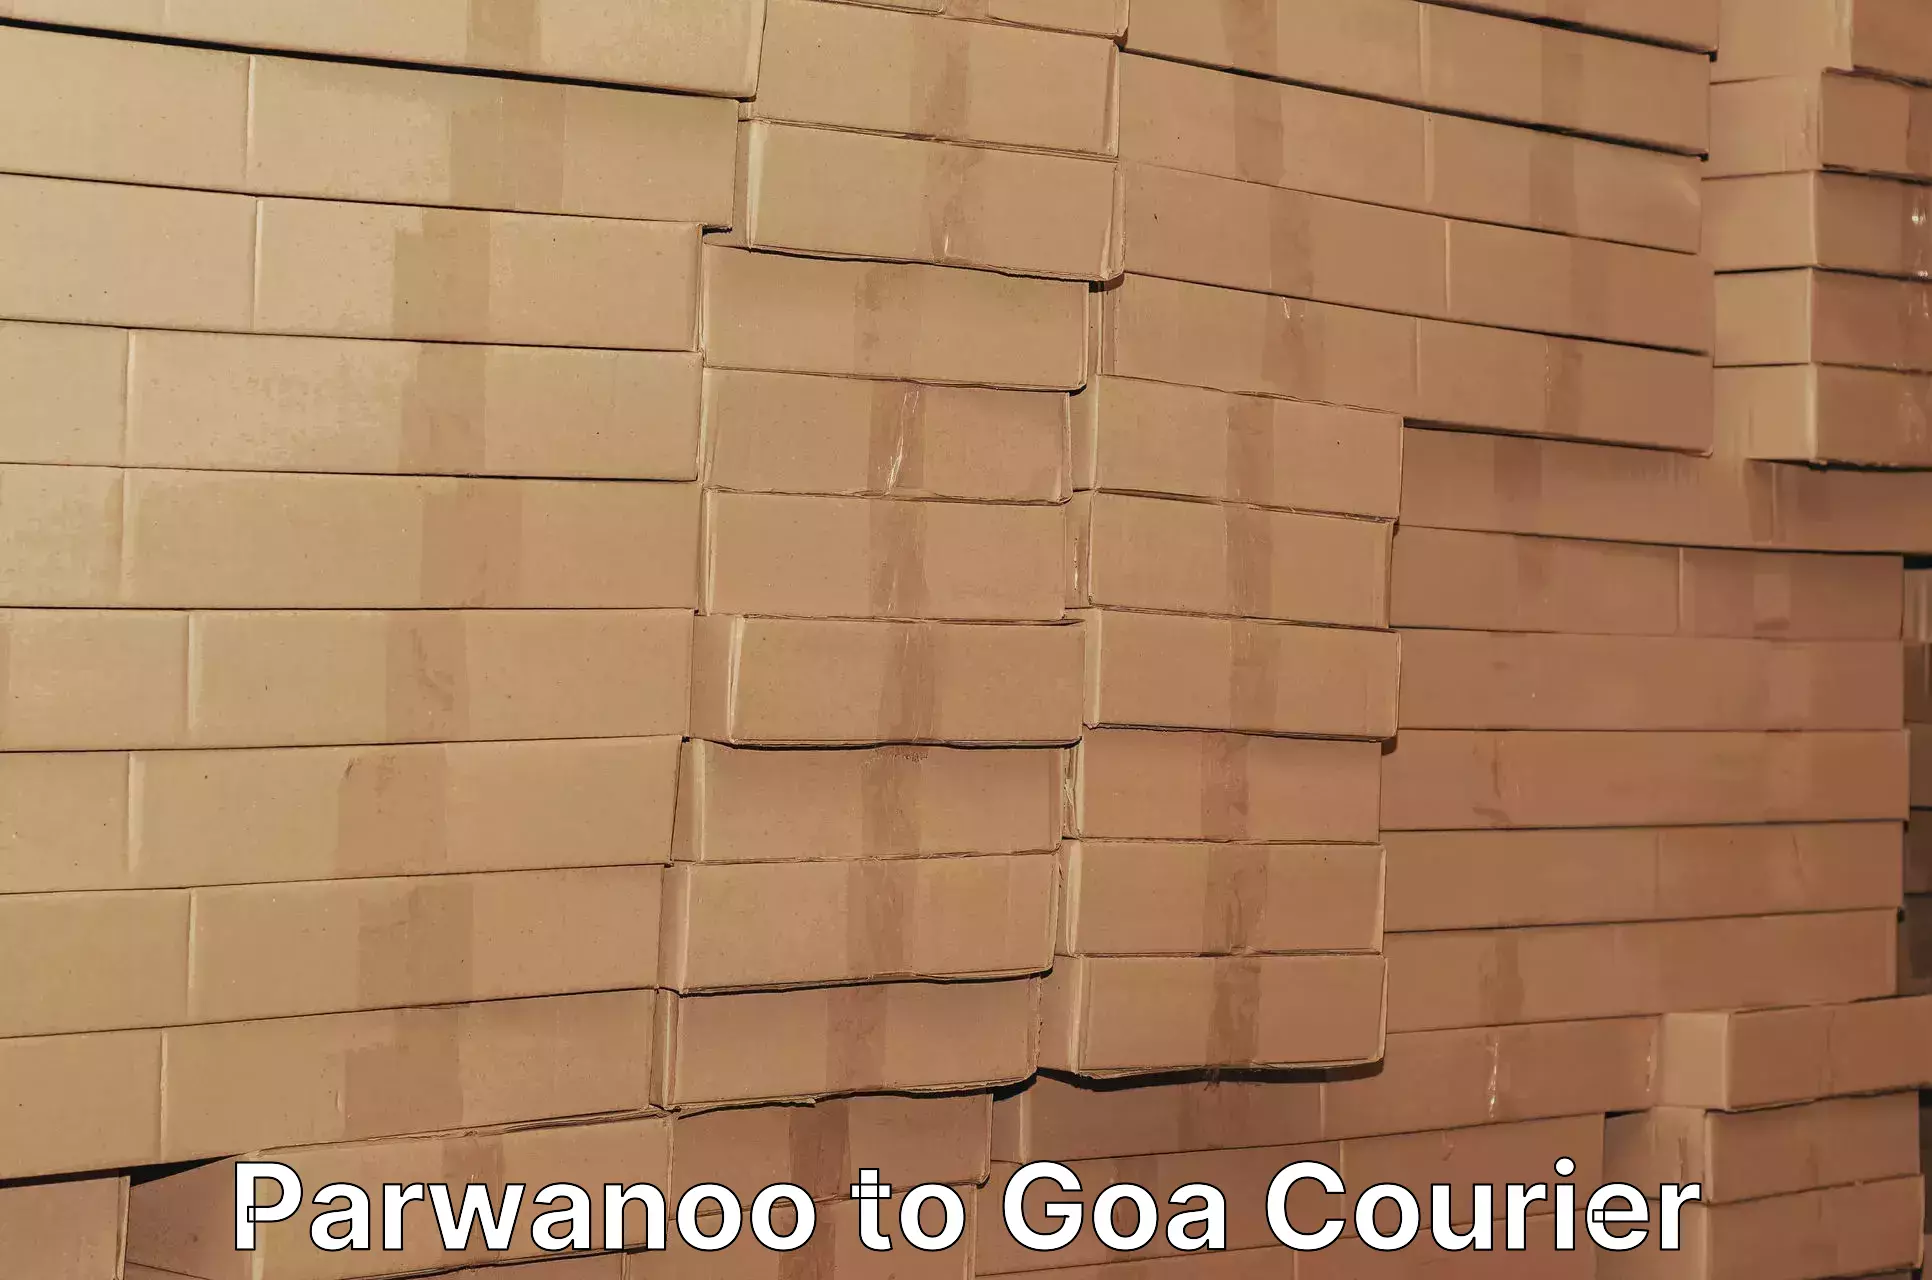 Supply chain efficiency in Parwanoo to South Goa